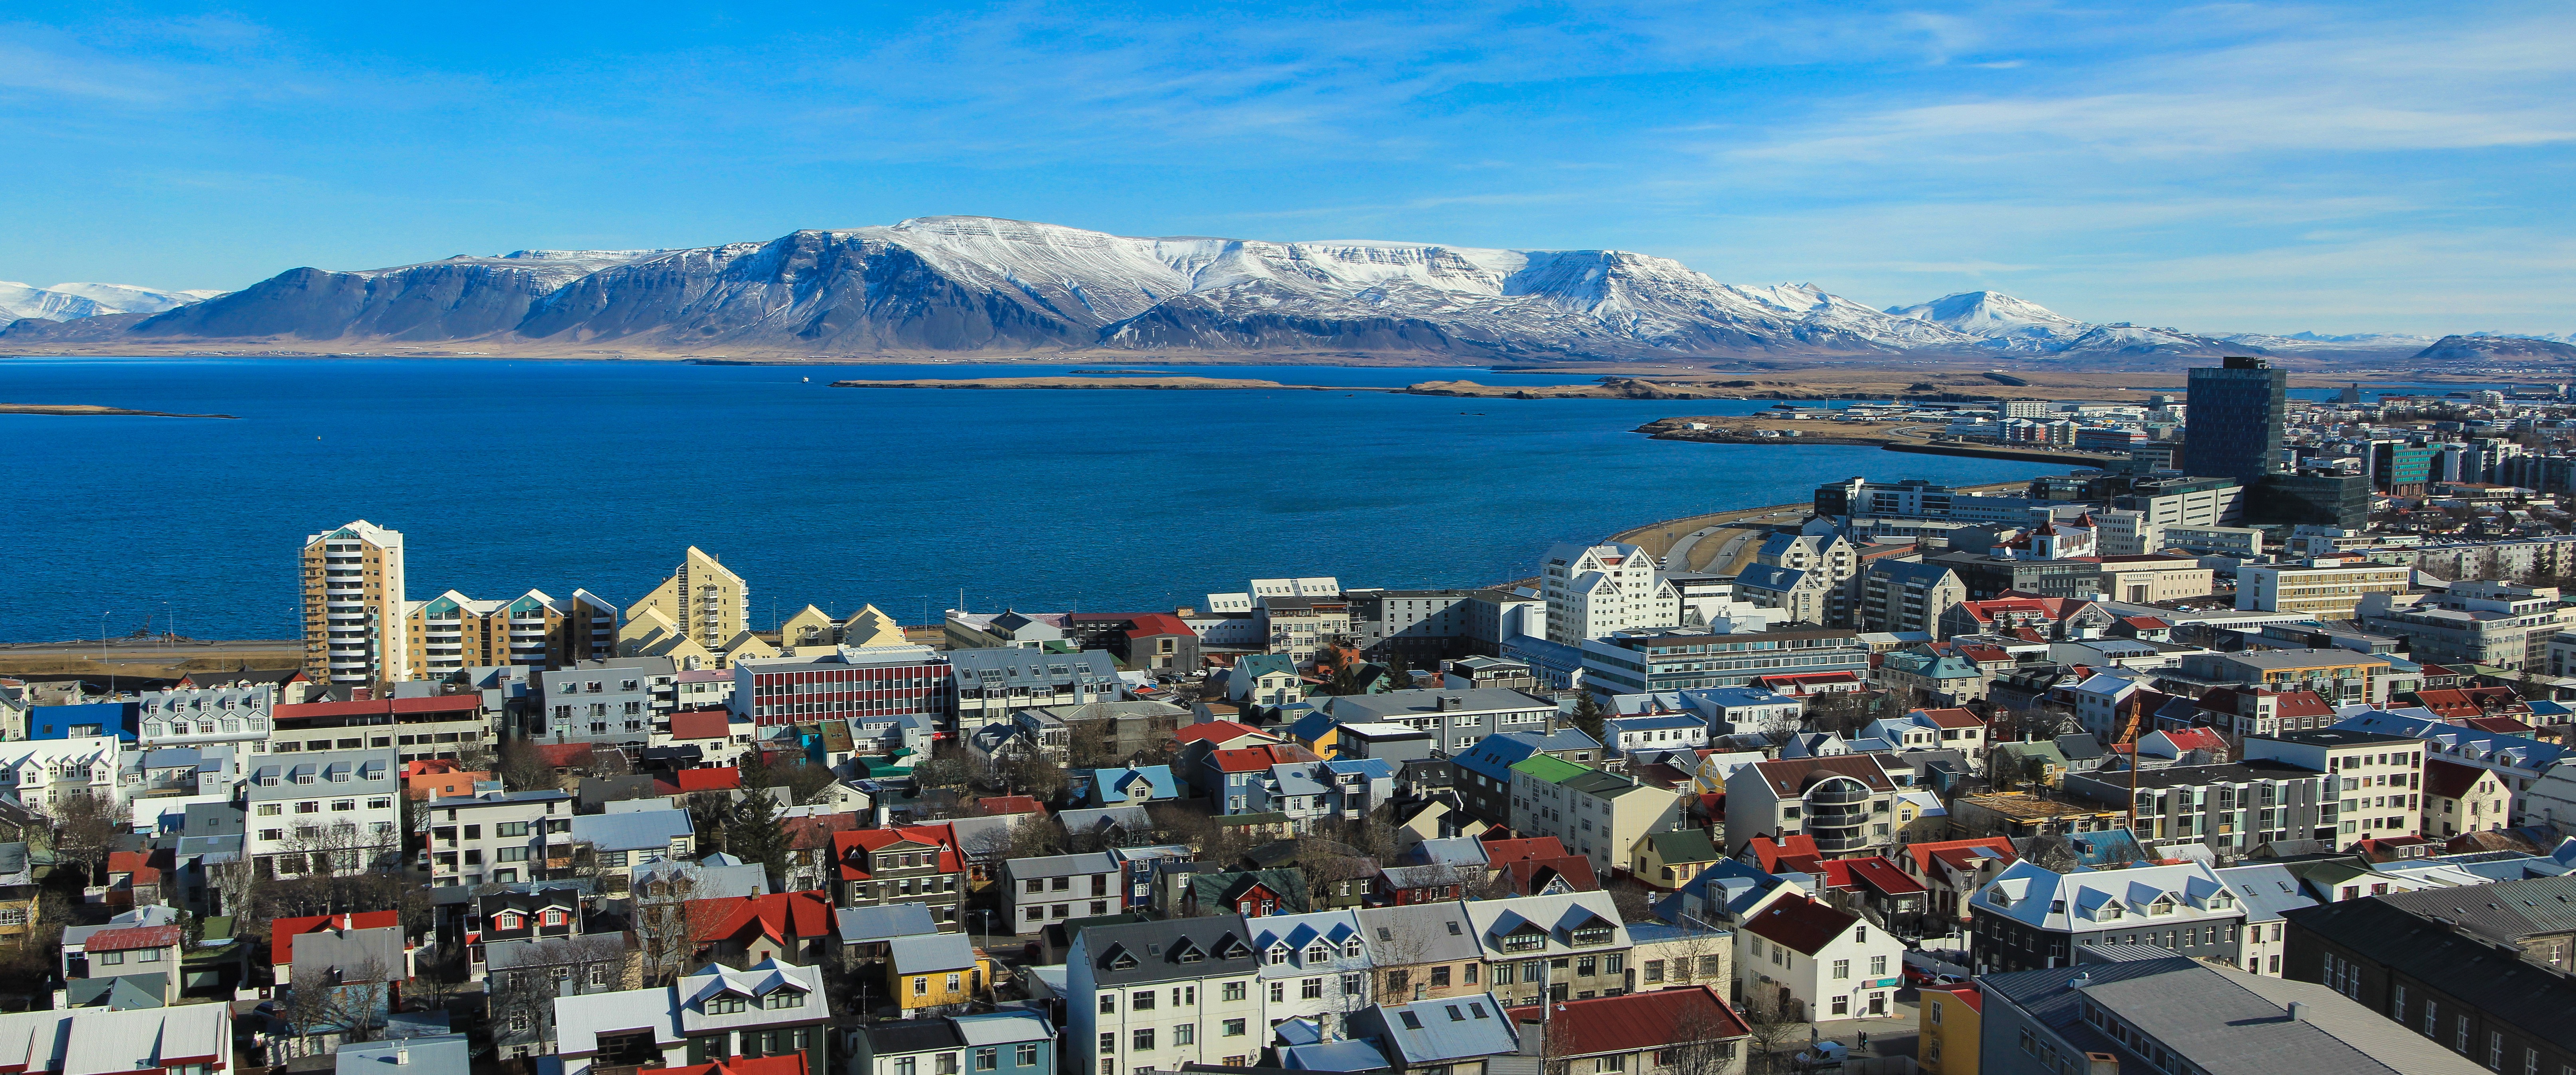 Reykjavik Walking Tour Explore Icelands Capital With A Local Guide